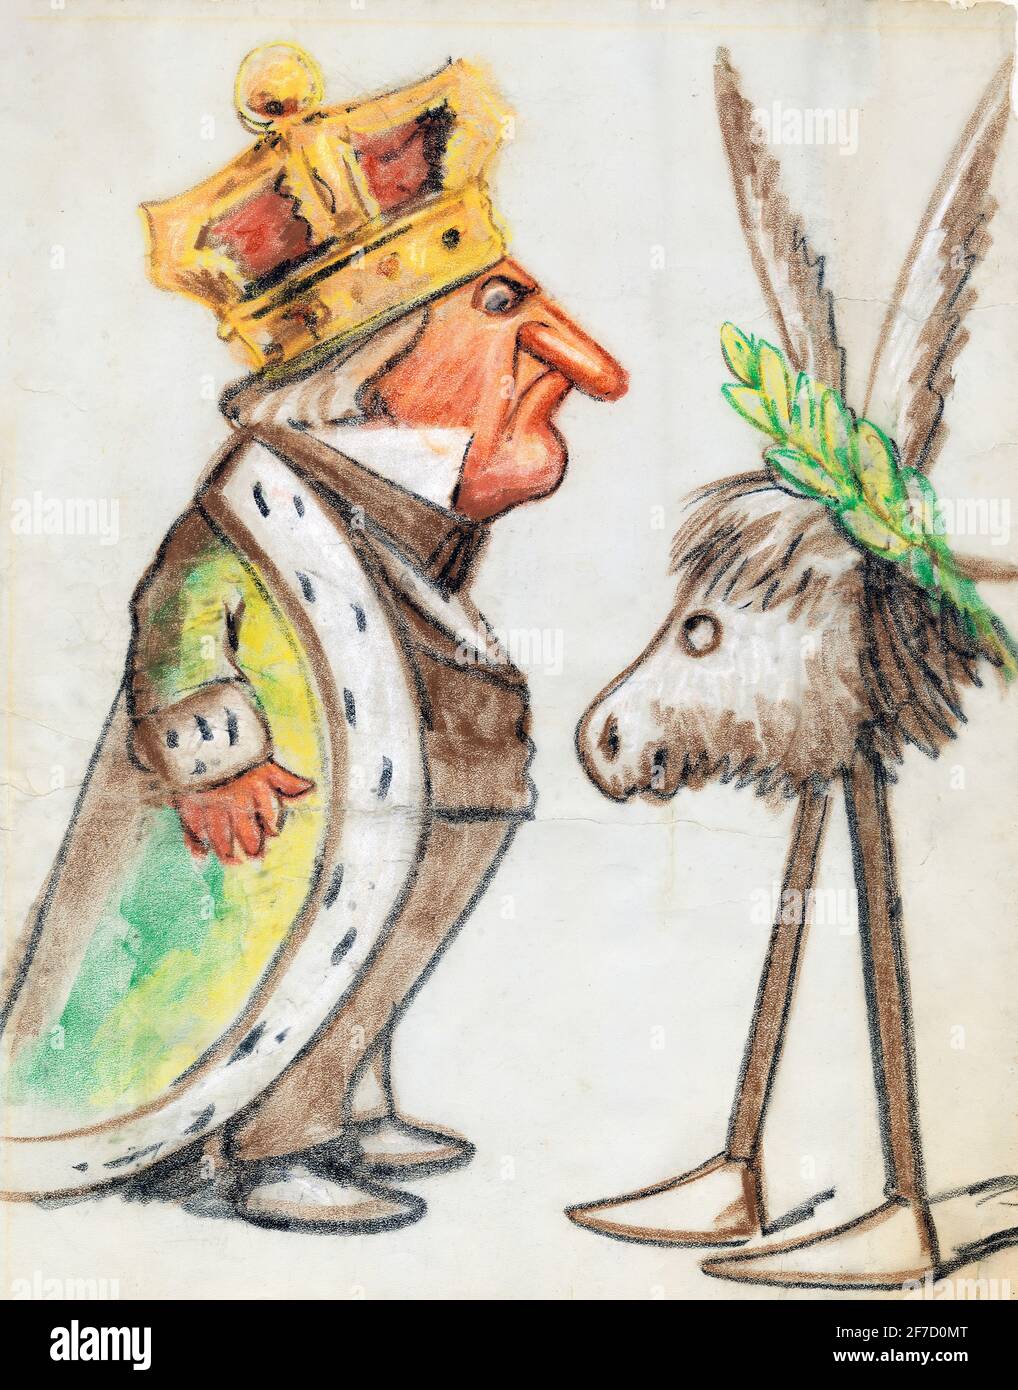 Caricature of the US President, Andrew Johnson, by the American caricaturist and cartoonist, Thomas Nast (1840-1902), pastel on paper, 1873 Stock Photo